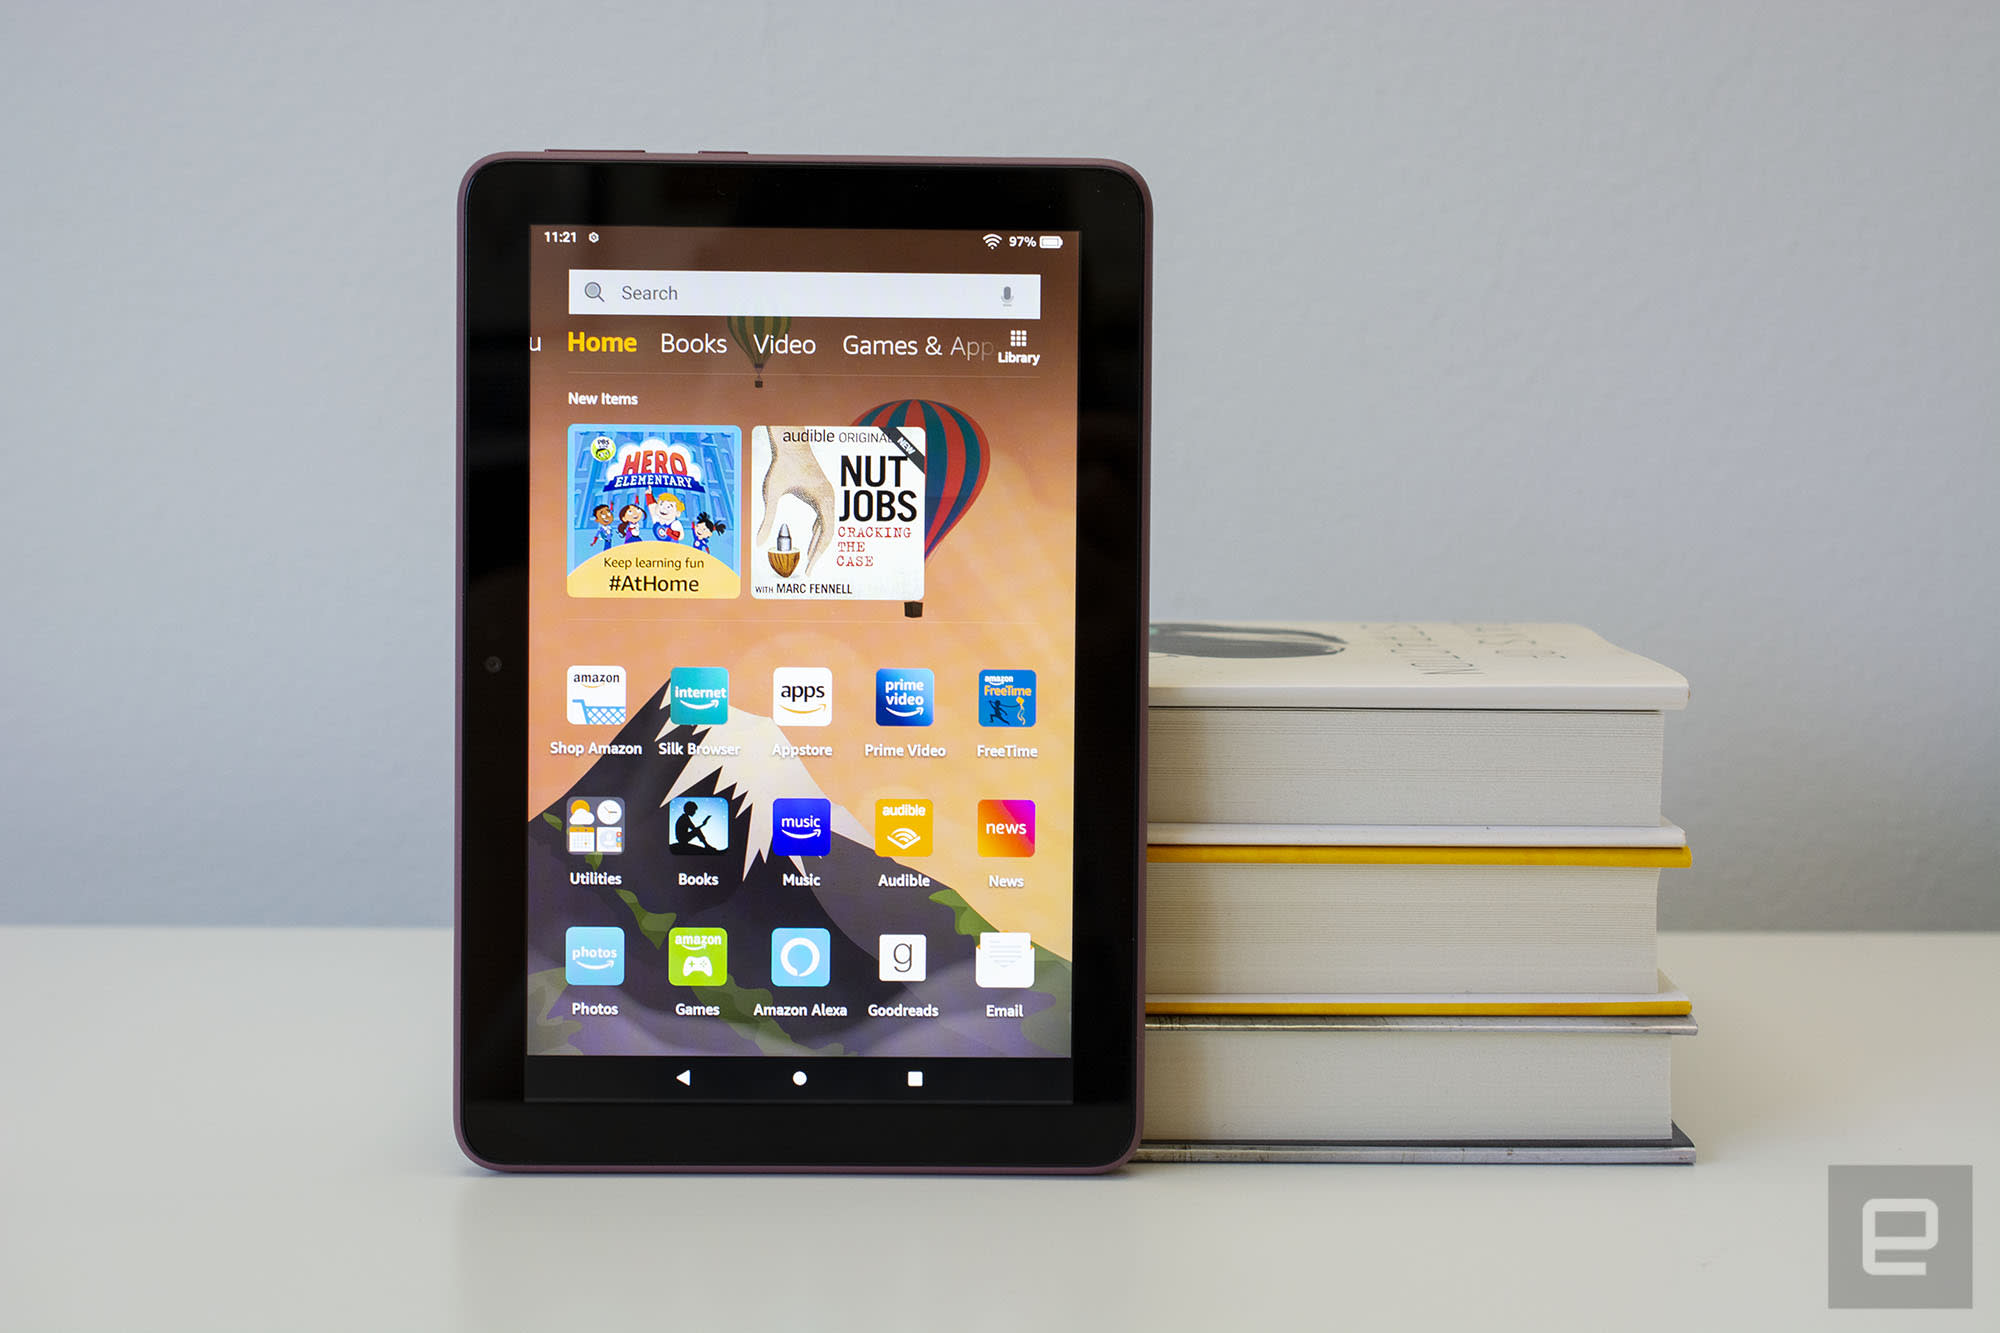 Amazon Fire Hd 8 Review A Good Cheap Tablet With One Big Compromise Engadget - can you play roblox on kindle fire 8